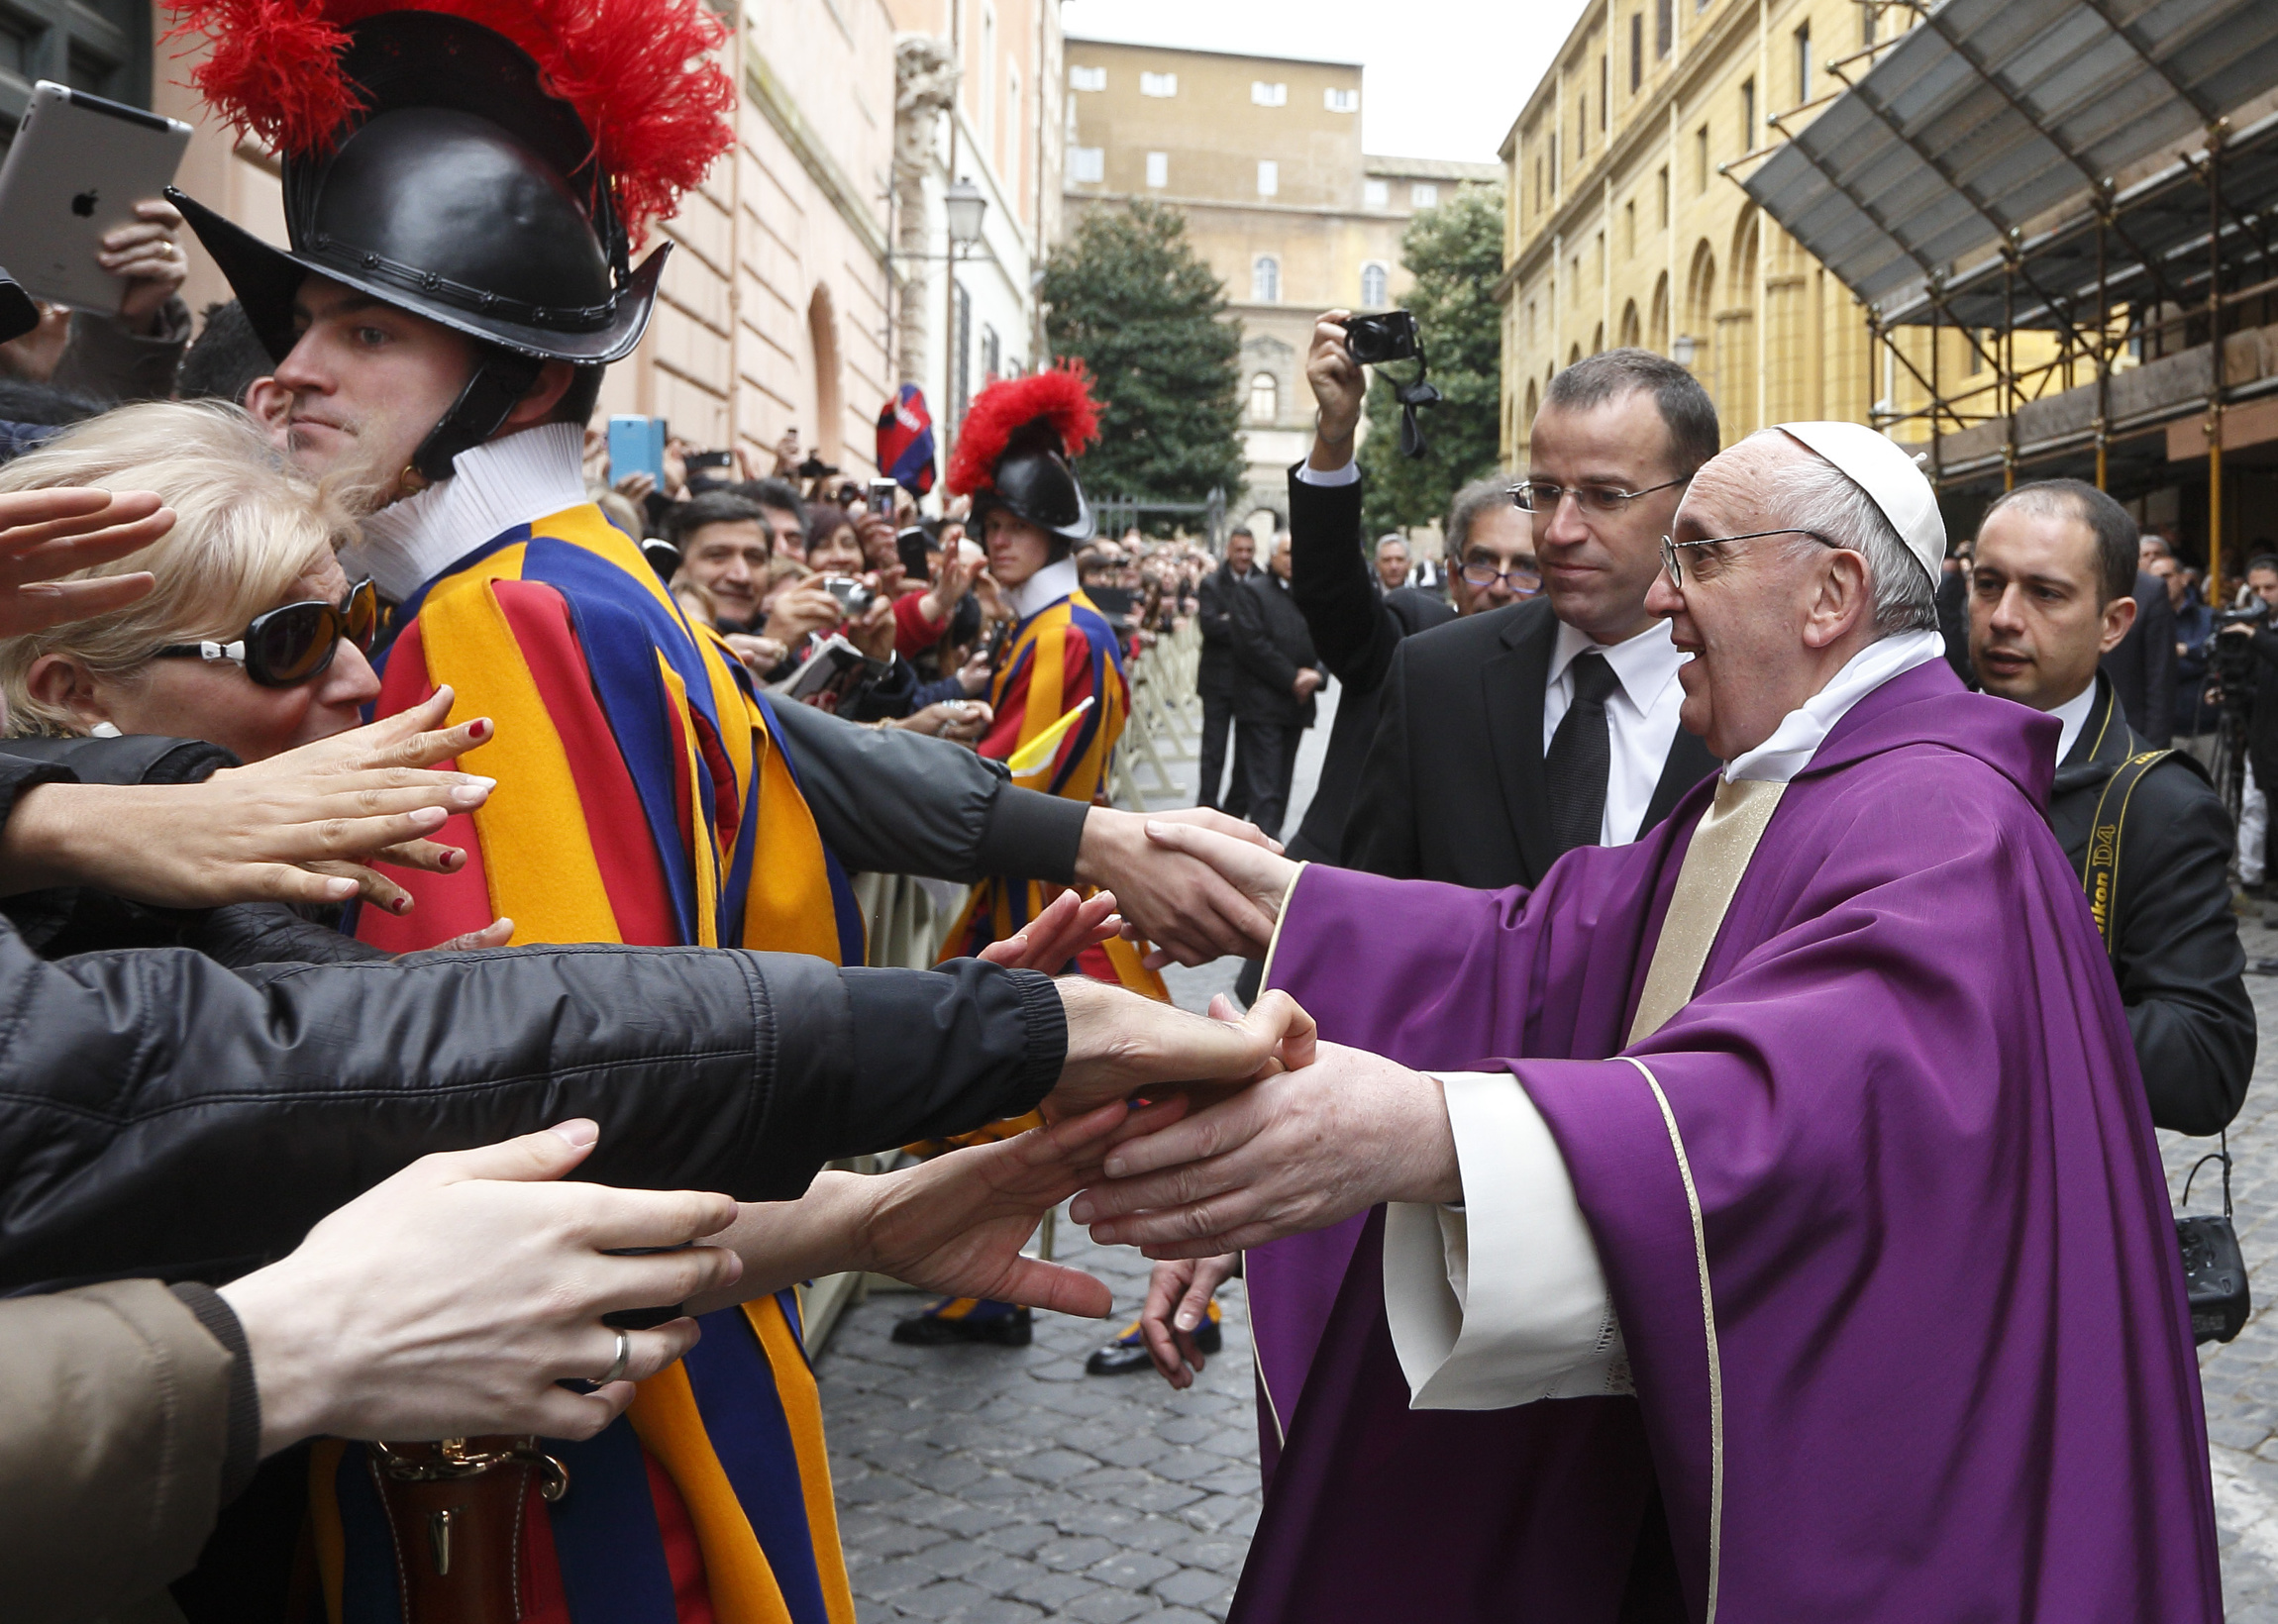 Pope Francis greets people after celebrating Mass at St. Anne's Parish within the Vatican in 2013. (CNS photo/Paul Haring)